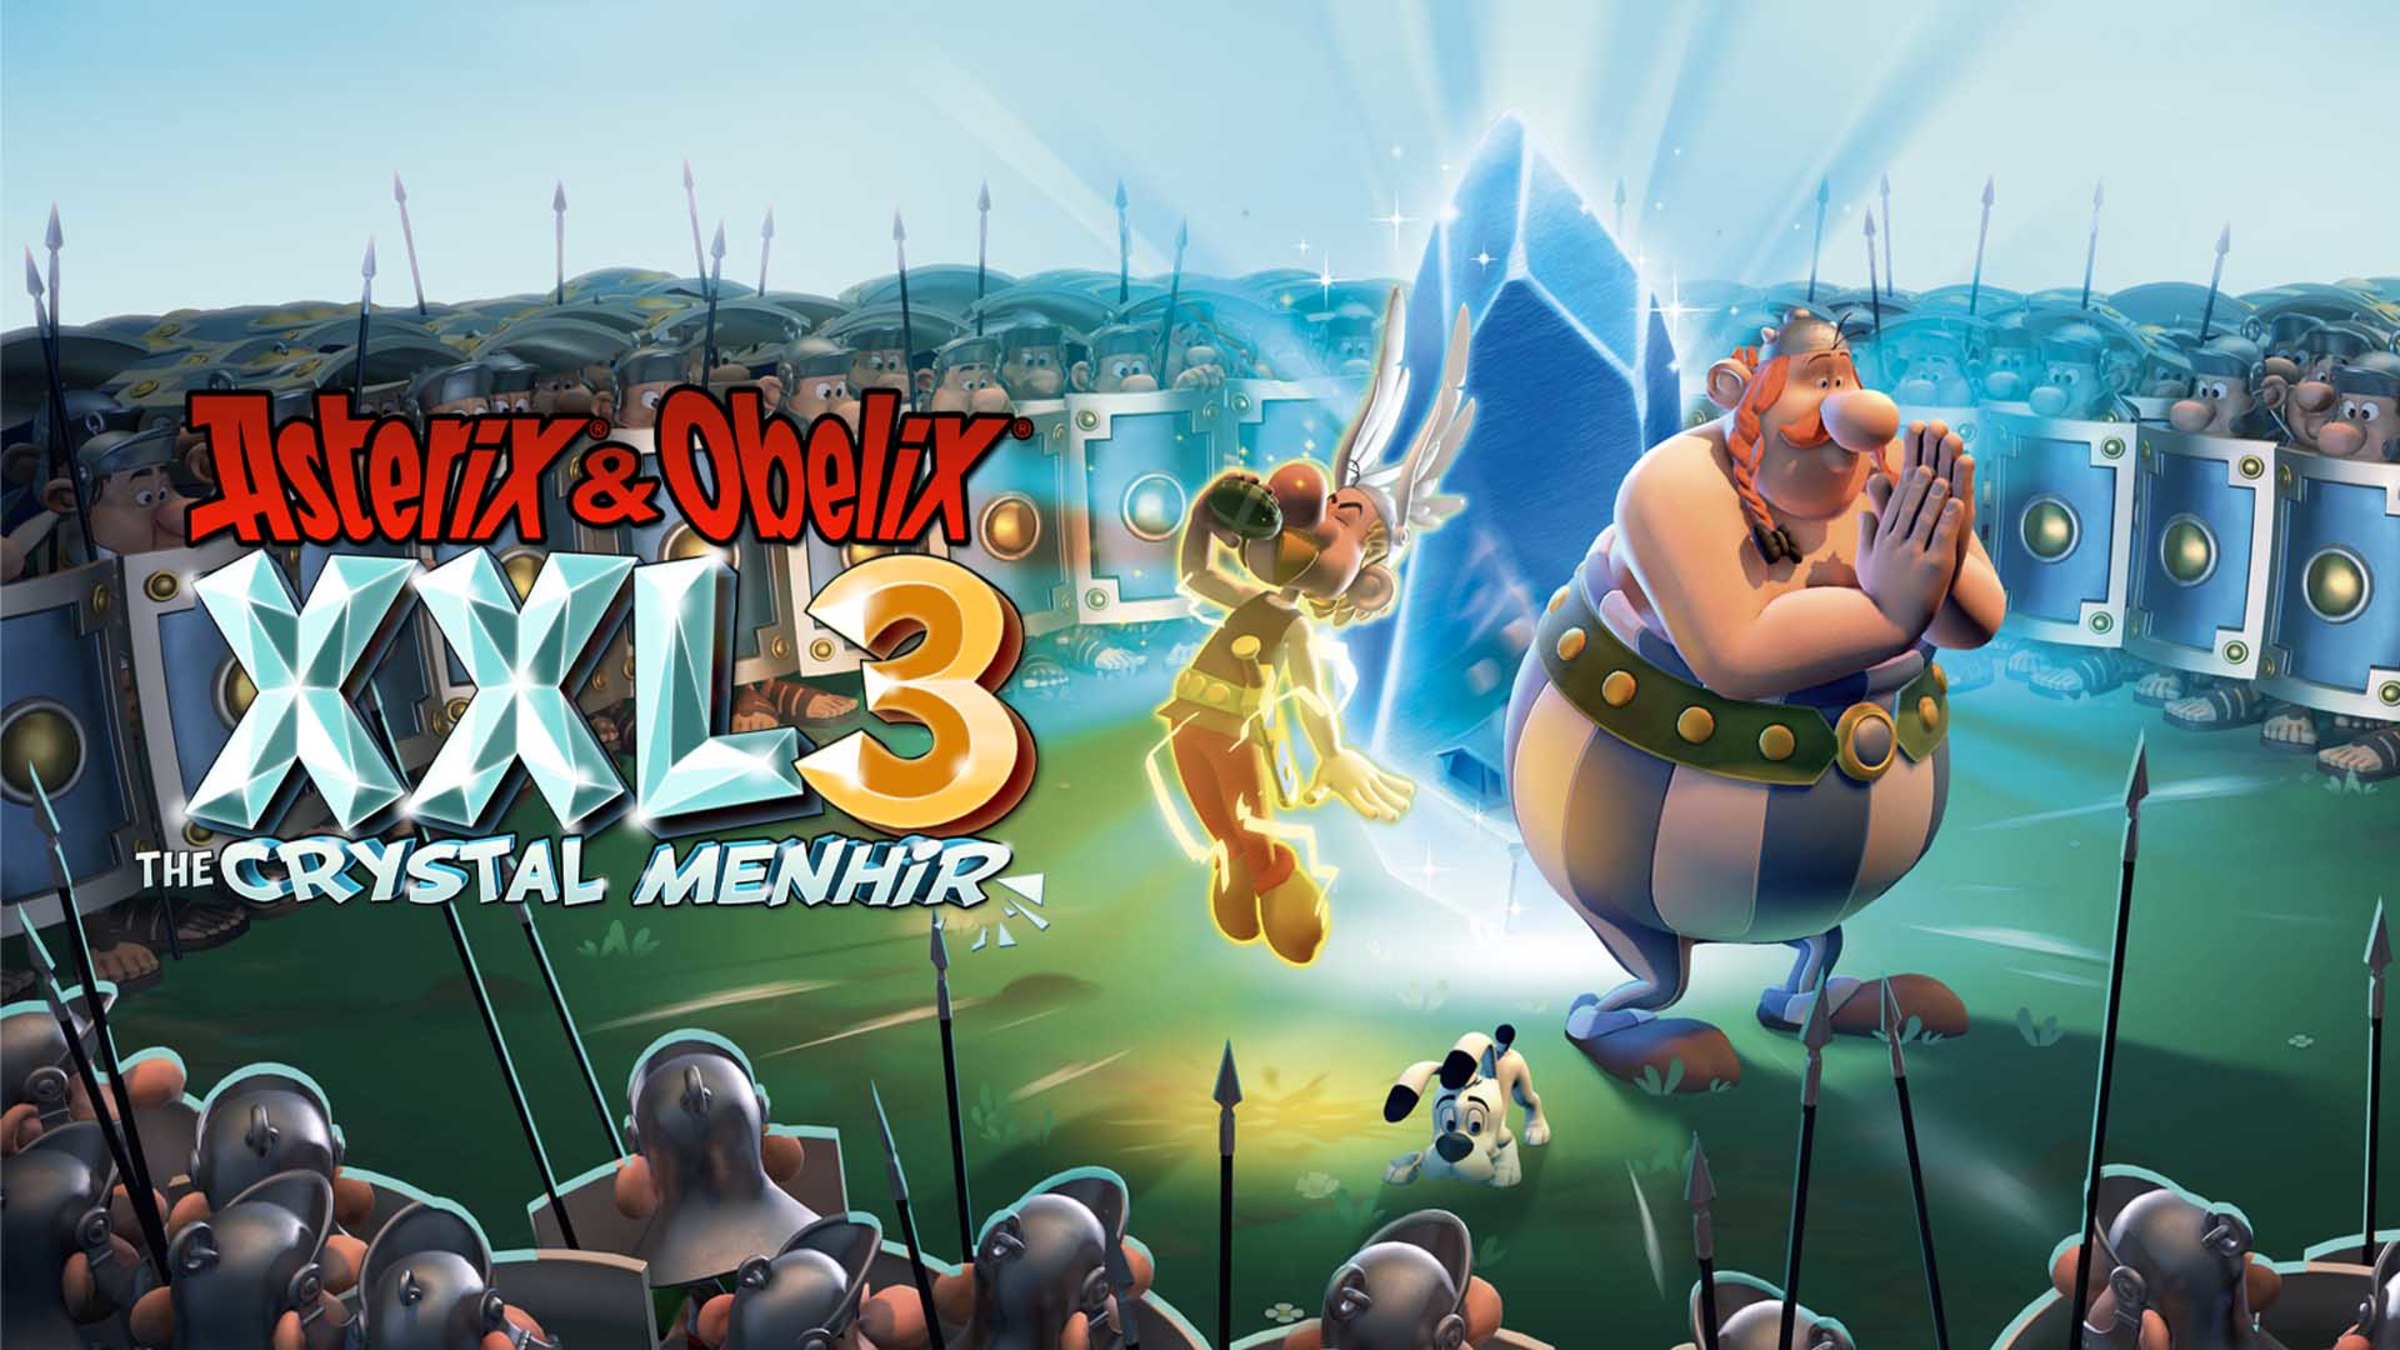 Asterix & Obelix XXL: Romastered for Nintendo Switch - Nintendo Official  Site